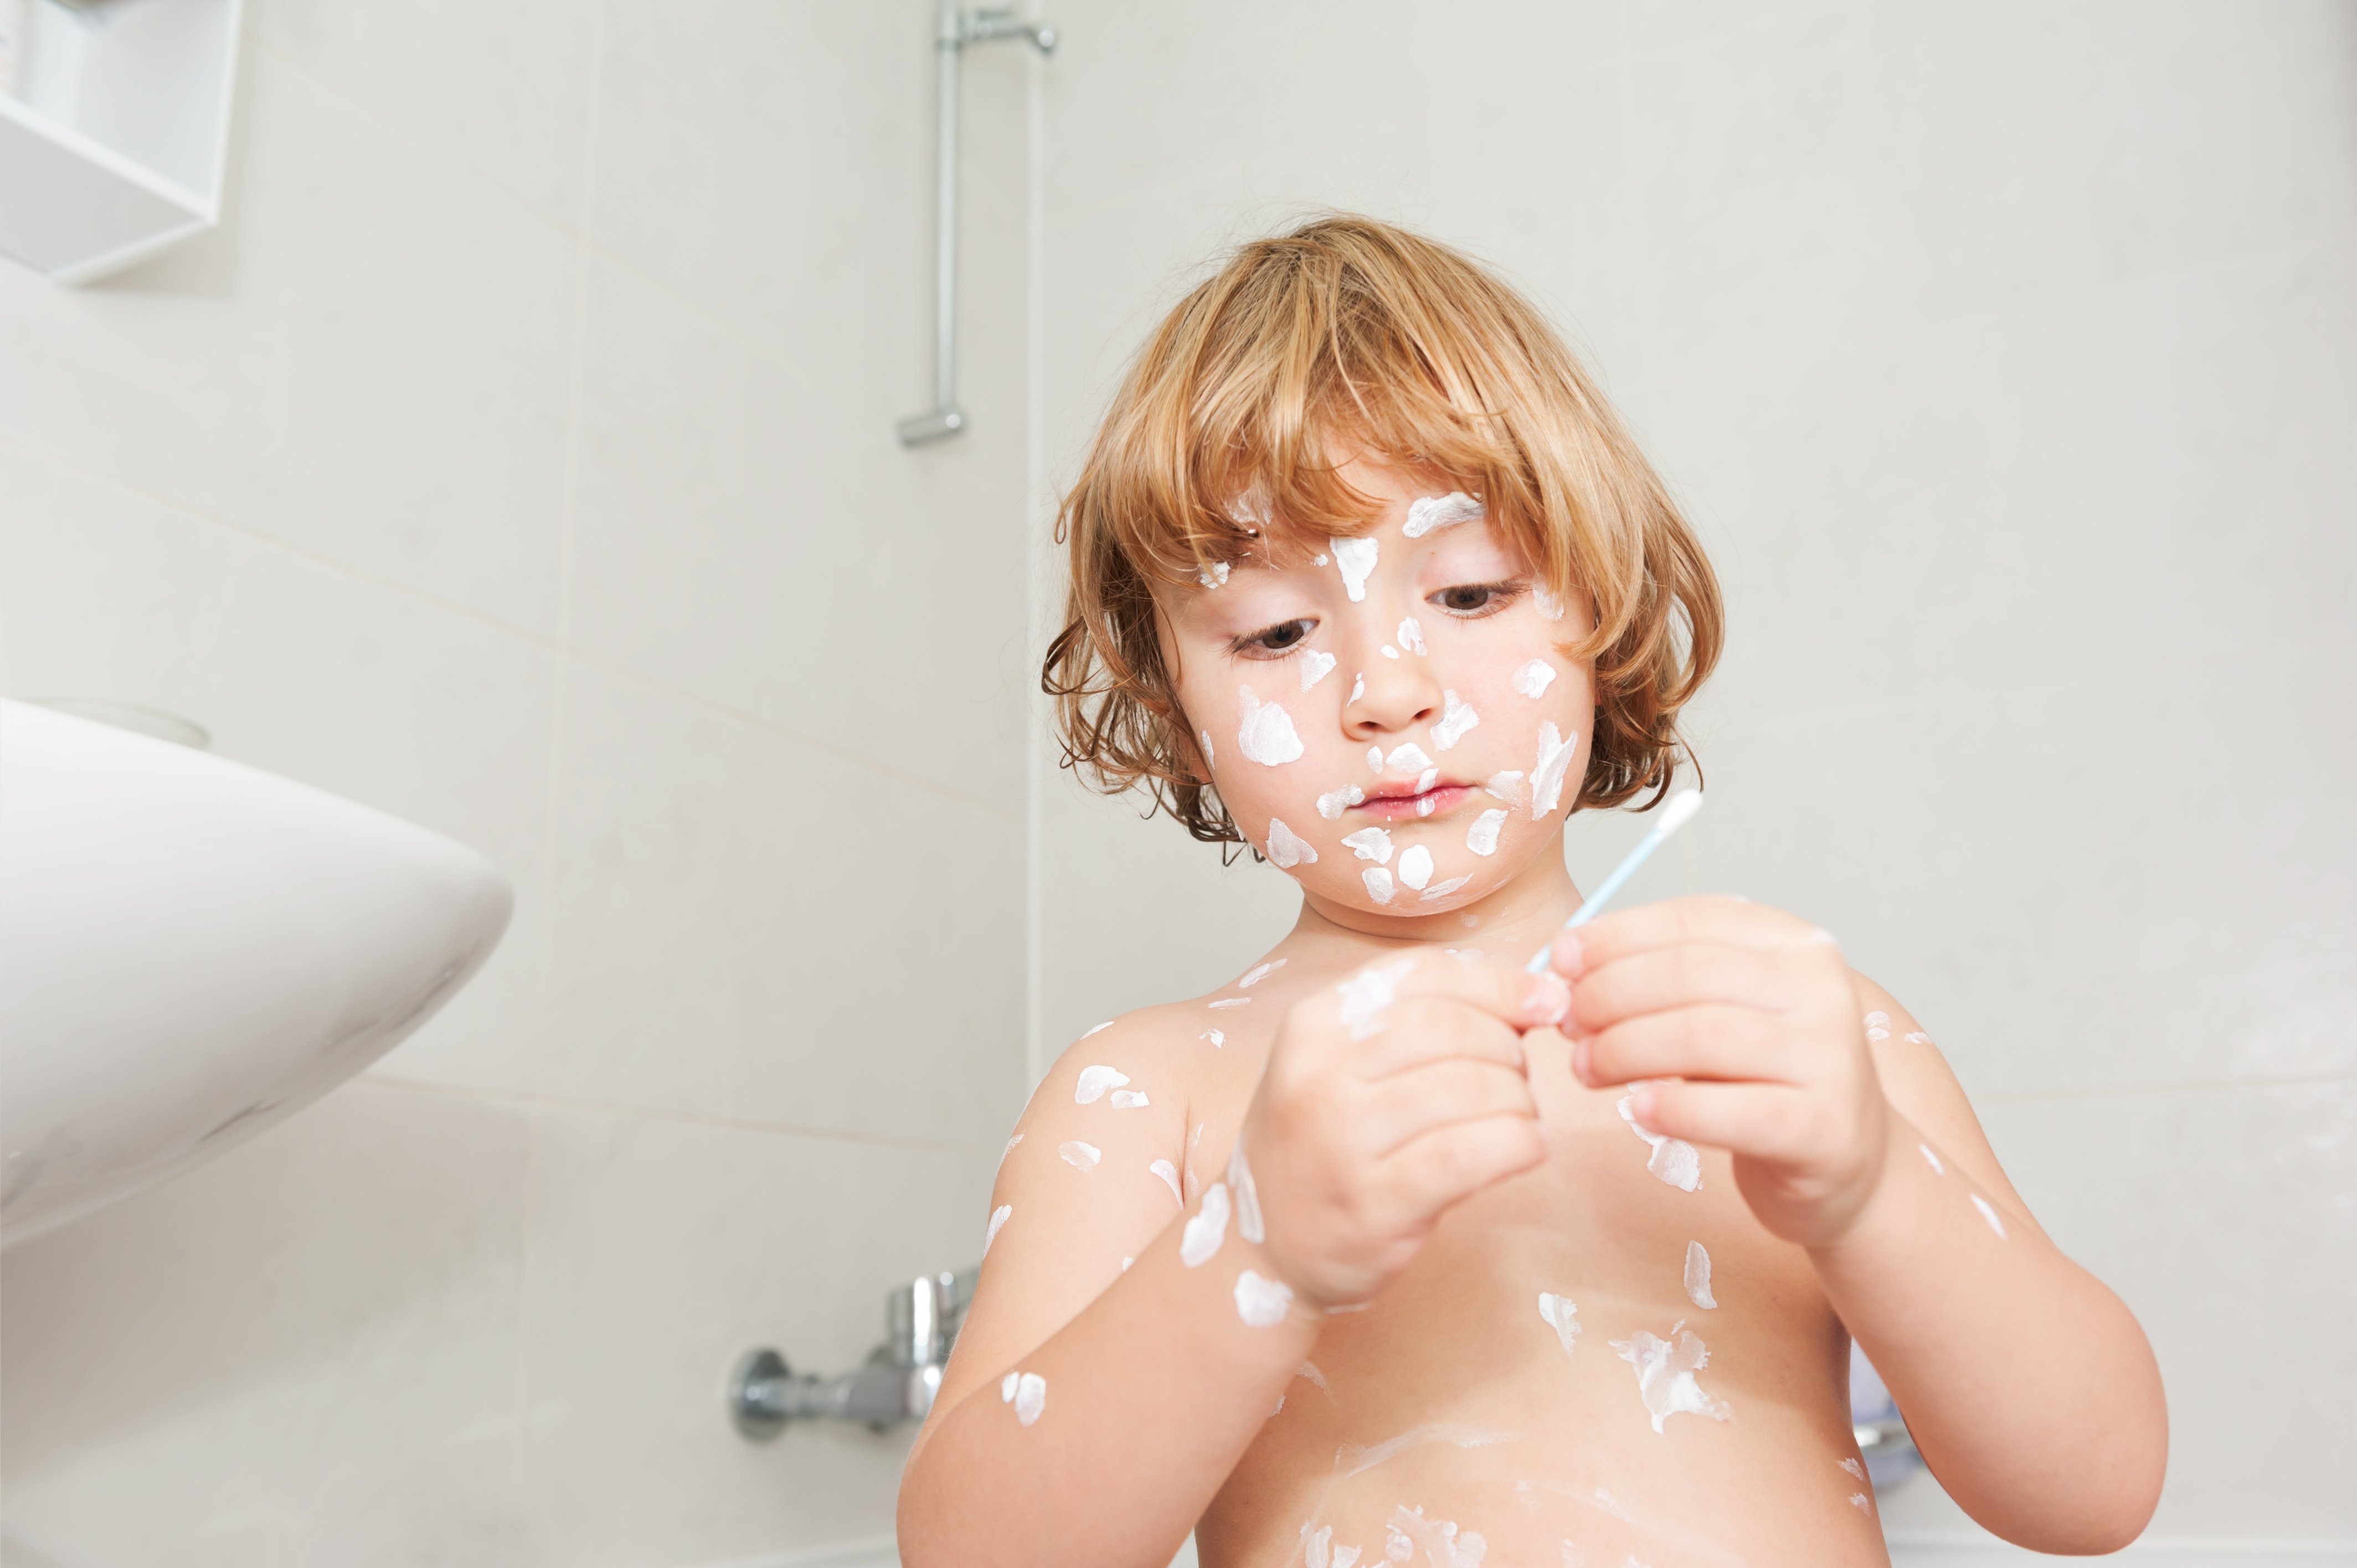 Little boy puts too much body lotion on her